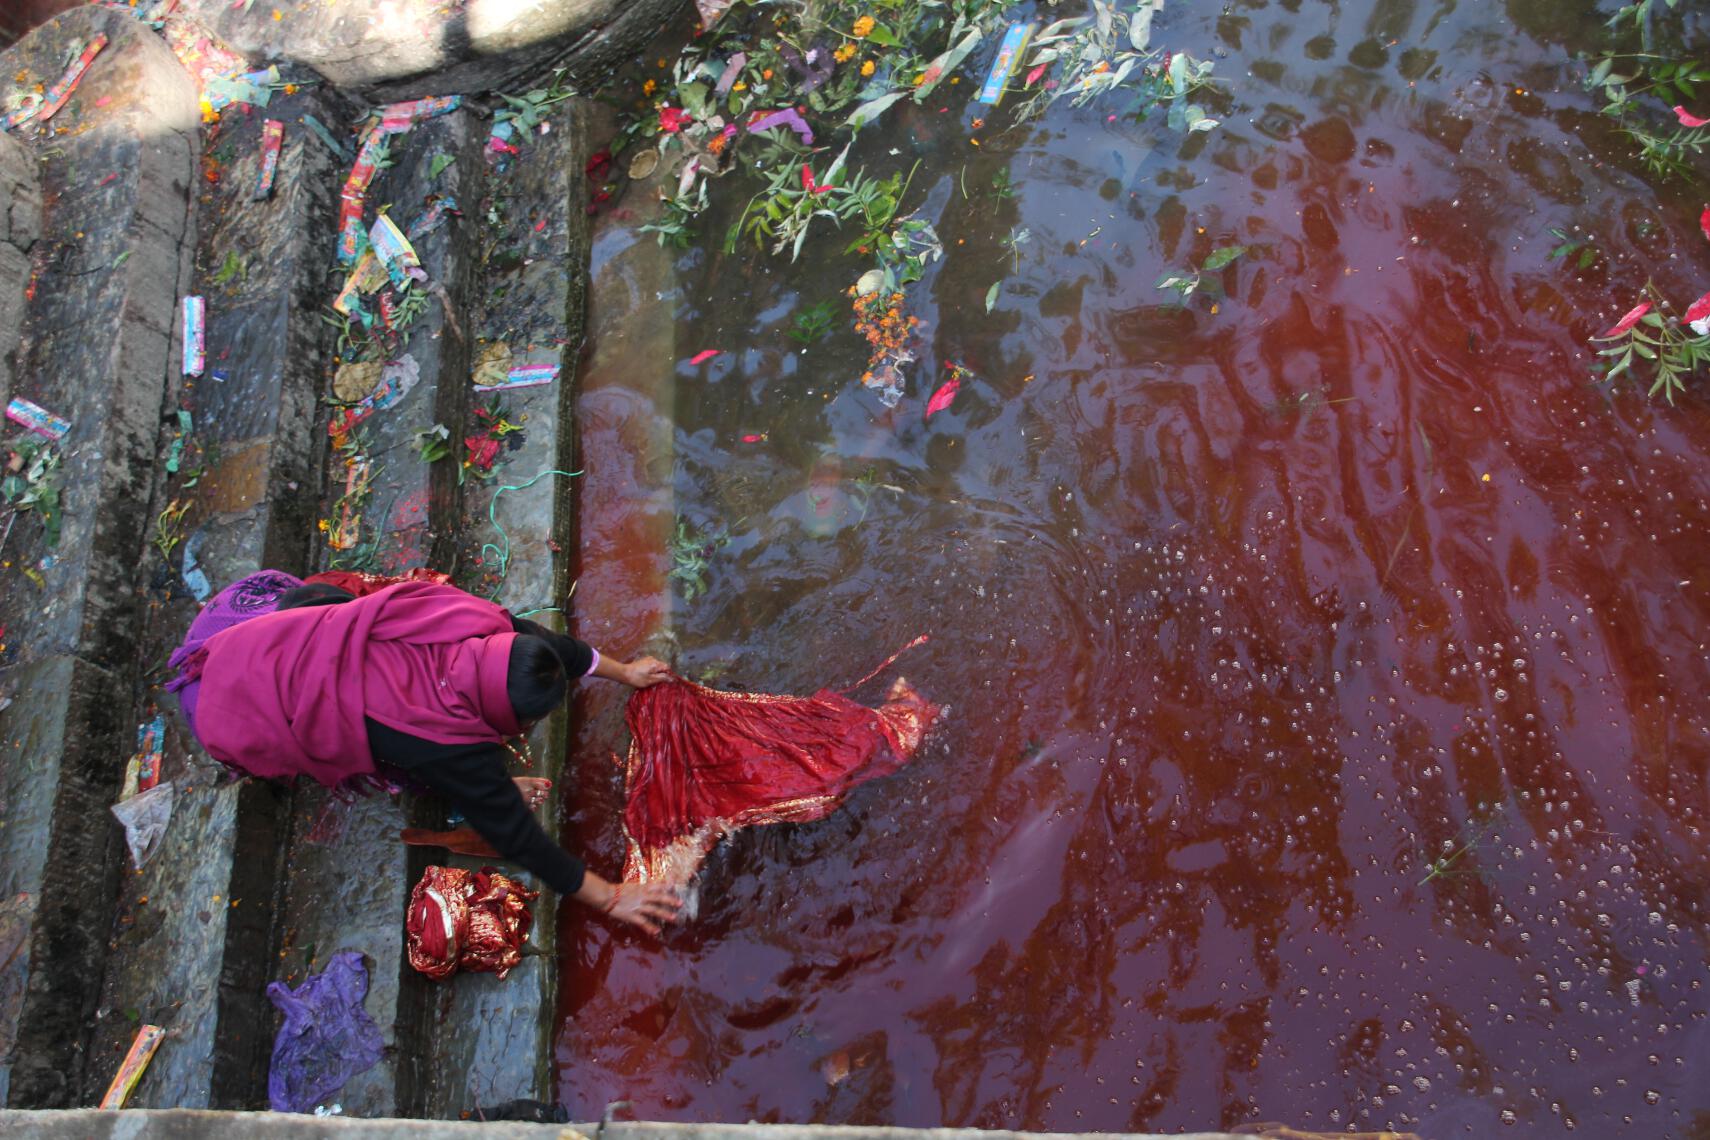 A woman soaks clothing in a blood-filled stream adjacent to the temple of Kali, Shiva&#039;s bloodthirsty consort.